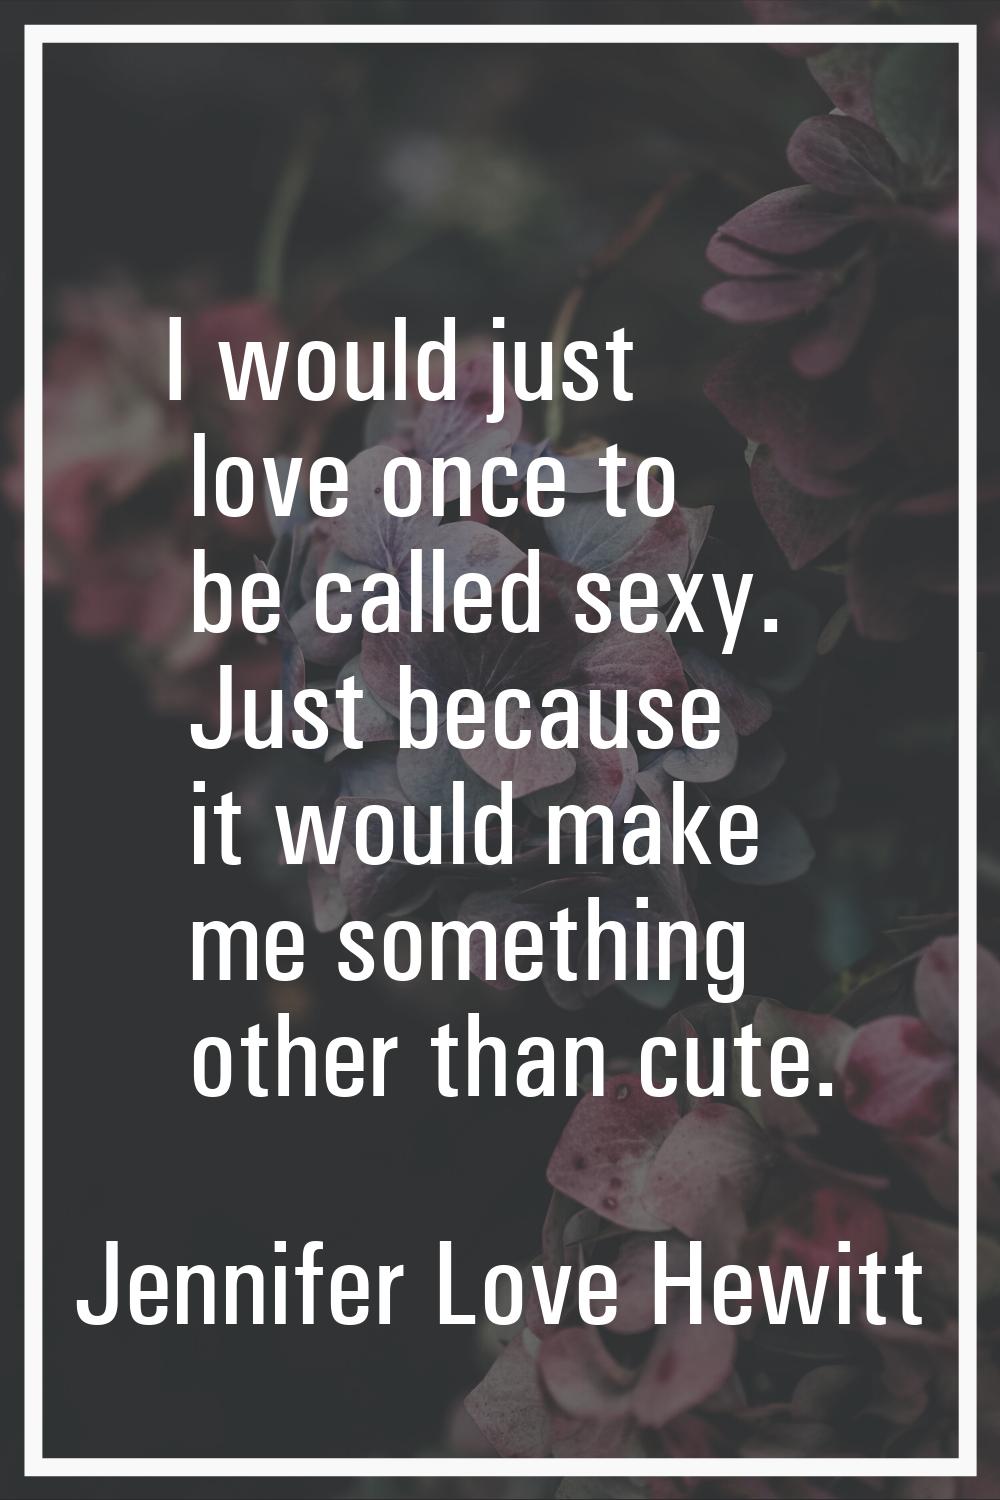 I would just love once to be called sexy. Just because it would make me something other than cute.